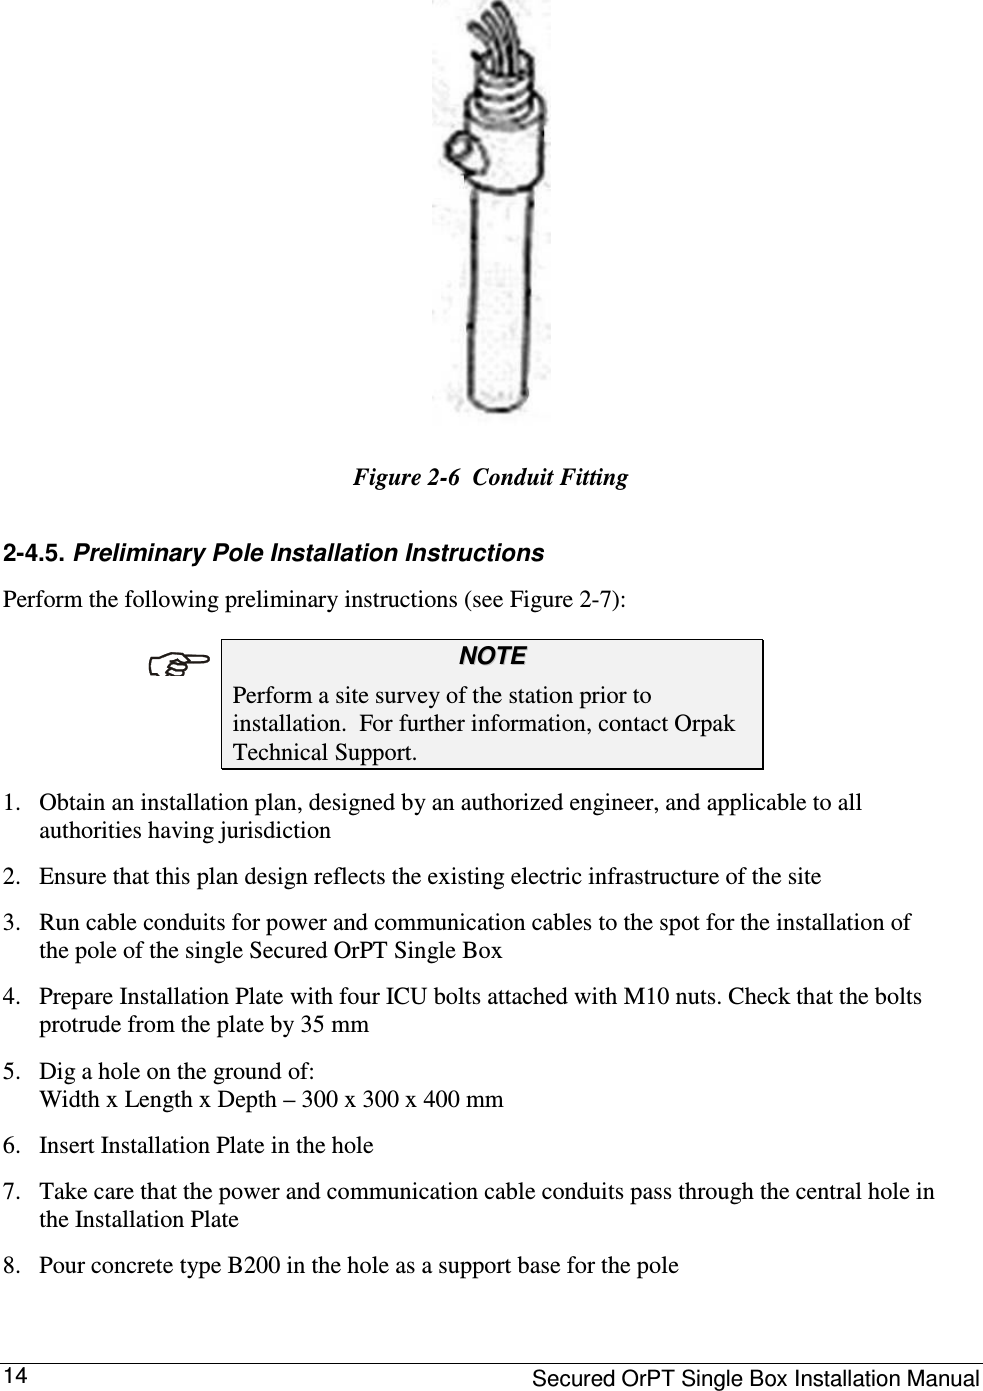     Secured OrPT Single Box Installation Manual 14  Figure  2-6  Conduit Fitting 2-4.5. Preliminary Pole Installation Instructions  Perform the following preliminary instructions (see Figure  2-7):  NNOOTTEE  Perform a site survey of the station prior to installation.  For further information, contact Orpak Technical Support.  1. Obtain an installation plan, designed by an authorized engineer, and applicable to all authorities having jurisdiction  2. Ensure that this plan design reflects the existing electric infrastructure of the site  3. Run cable conduits for power and communication cables to the spot for the installation of the pole of the single Secured OrPT Single Box  4. Prepare Installation Plate with four ICU bolts attached with M10 nuts. Check that the bolts protrude from the plate by 35 mm   5. Dig a hole on the ground of:  Width x Length x Depth – 300 x 300 x 400 mm  6. Insert Installation Plate in the hole  7. Take care that the power and communication cable conduits pass through the central hole in the Installation Plate  8. Pour concrete type B200 in the hole as a support base for the pole   